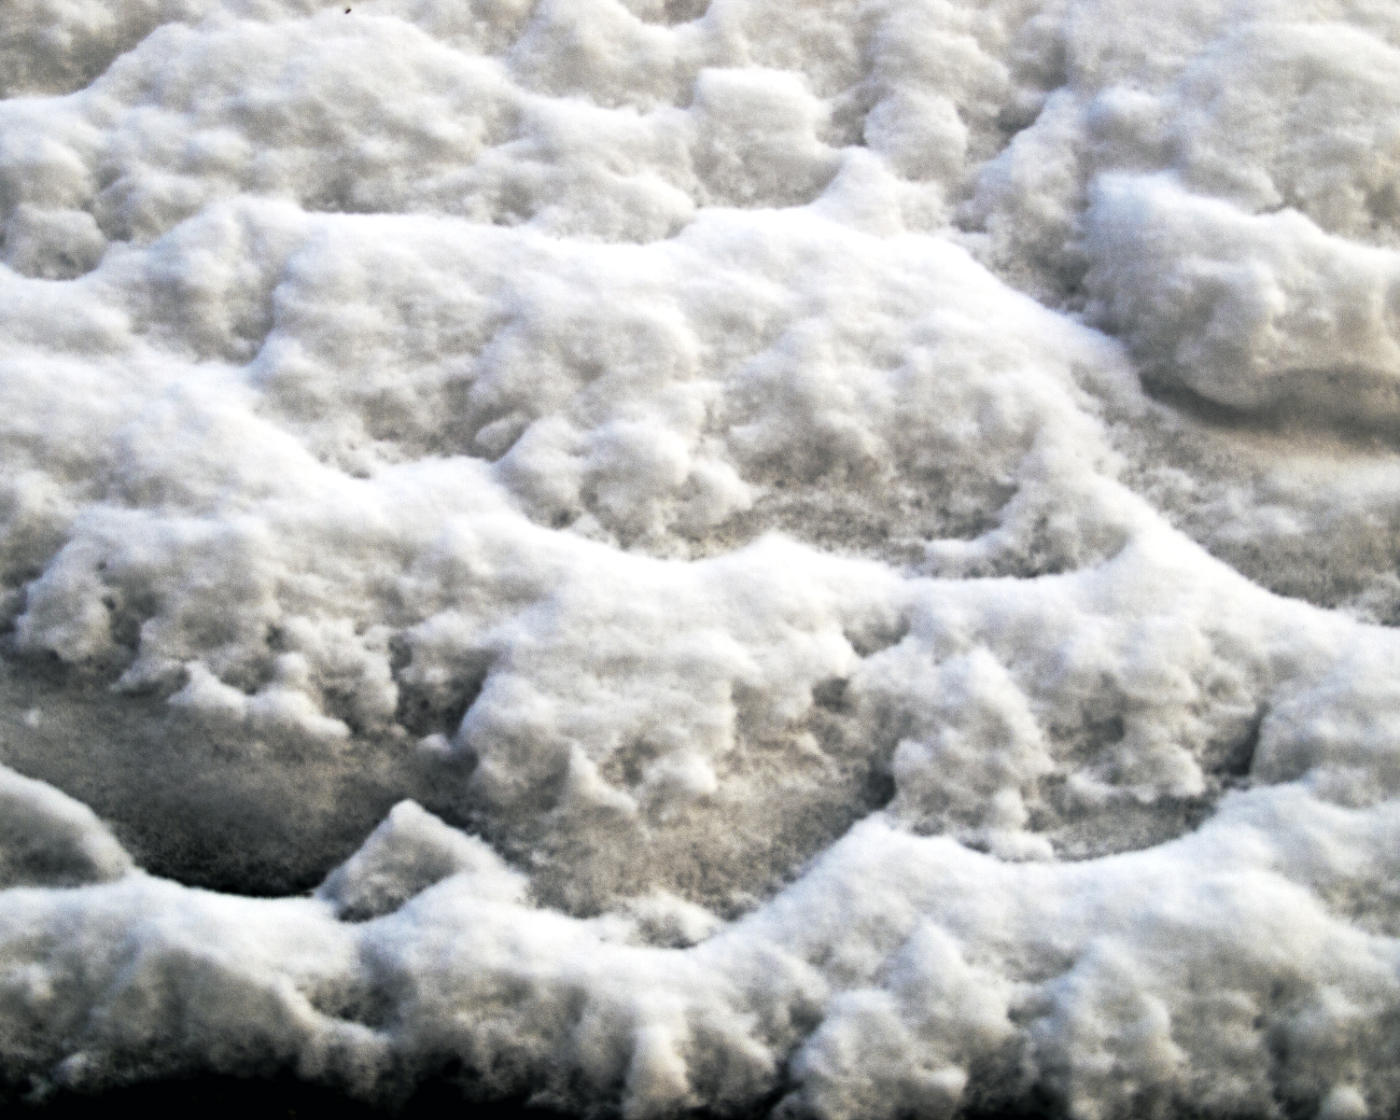 Gray and white patterns in closeup of snow